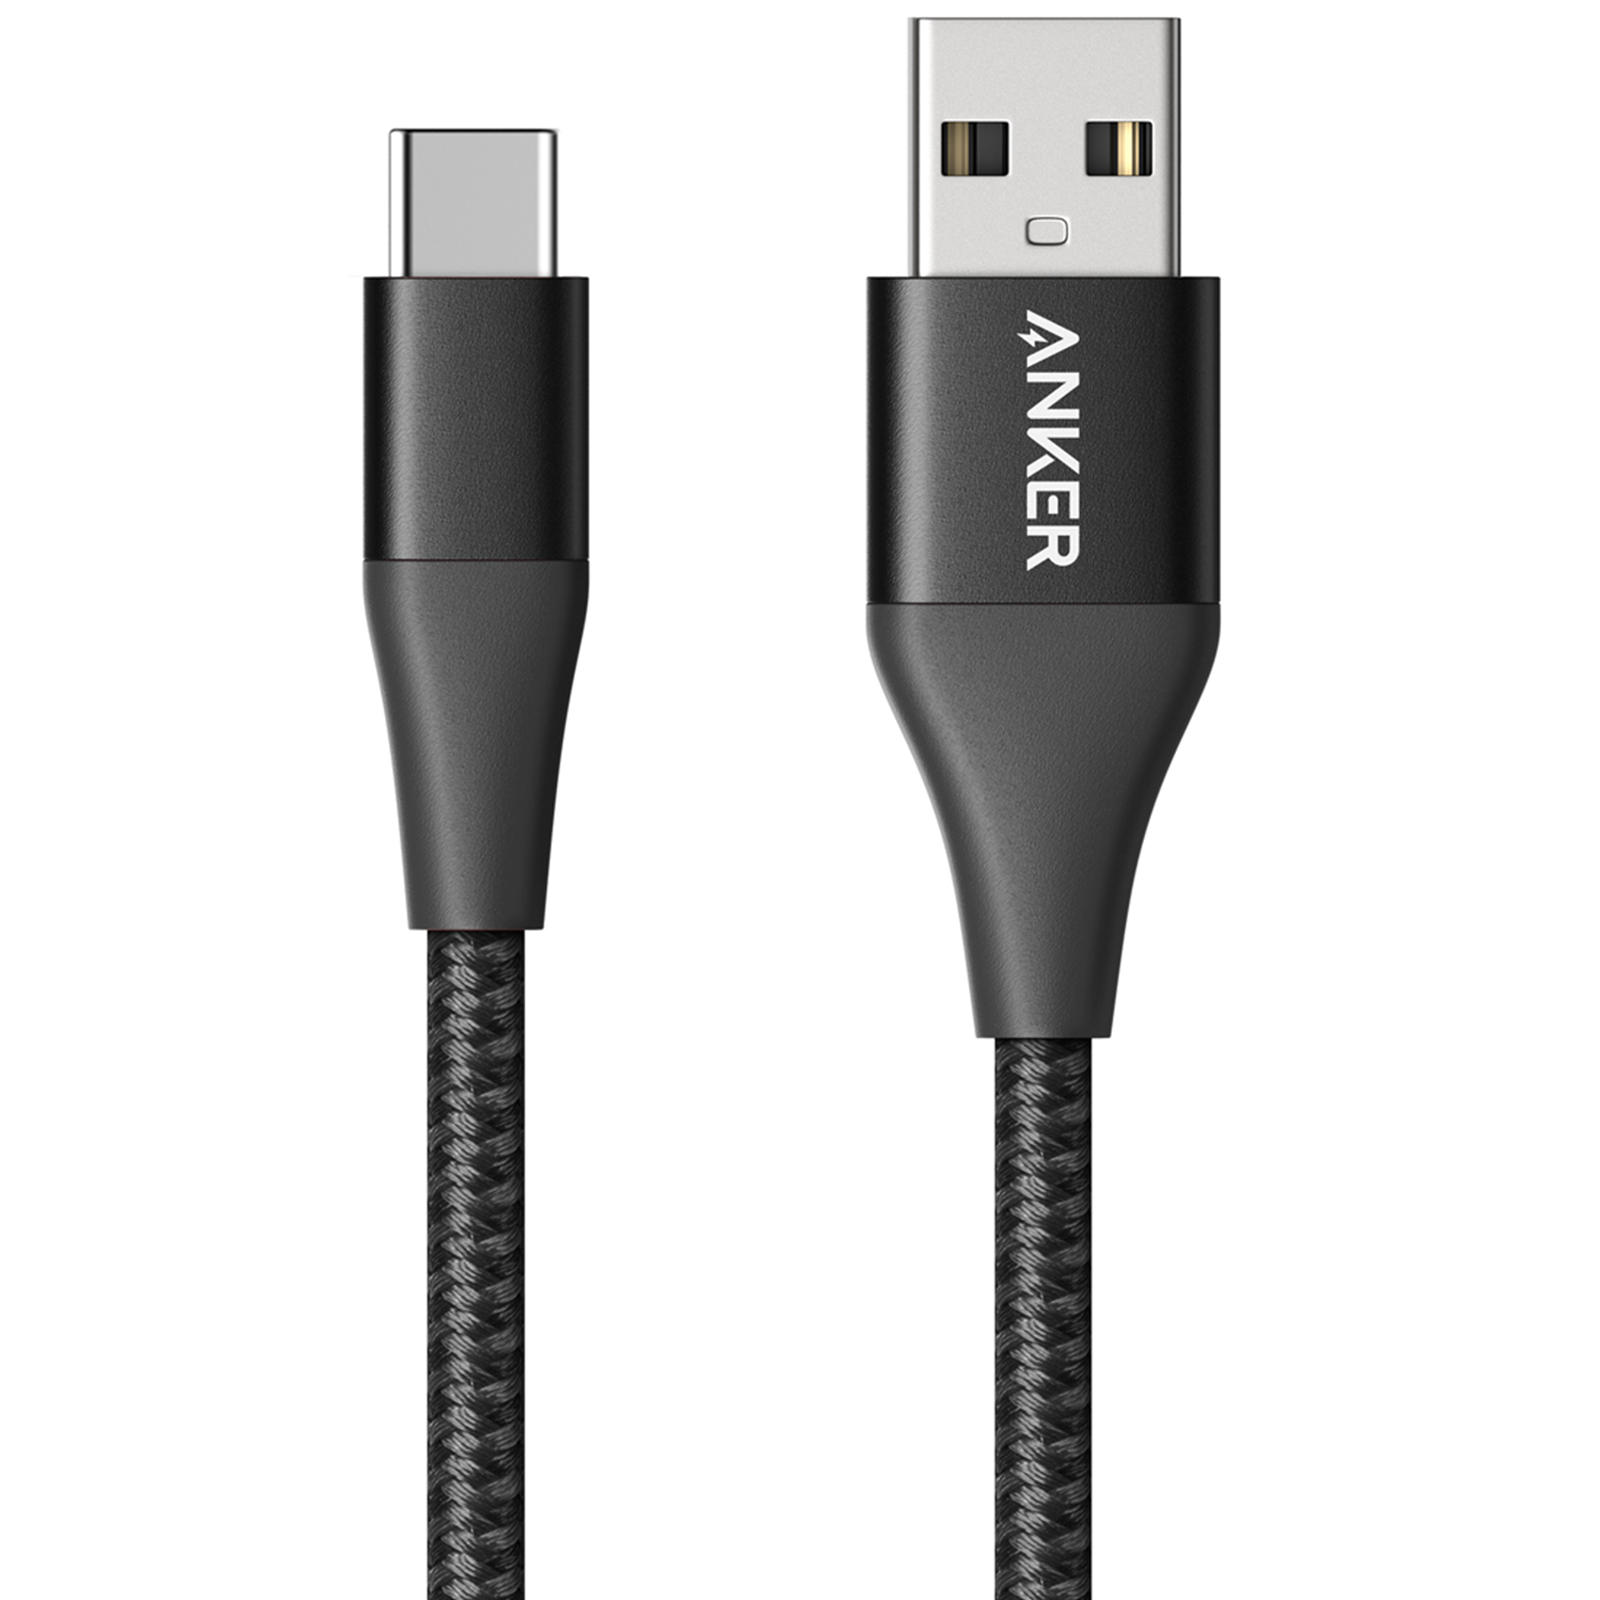 Anker PowerLine+ II AtoC 1.8m Data/Charging Cable - Black